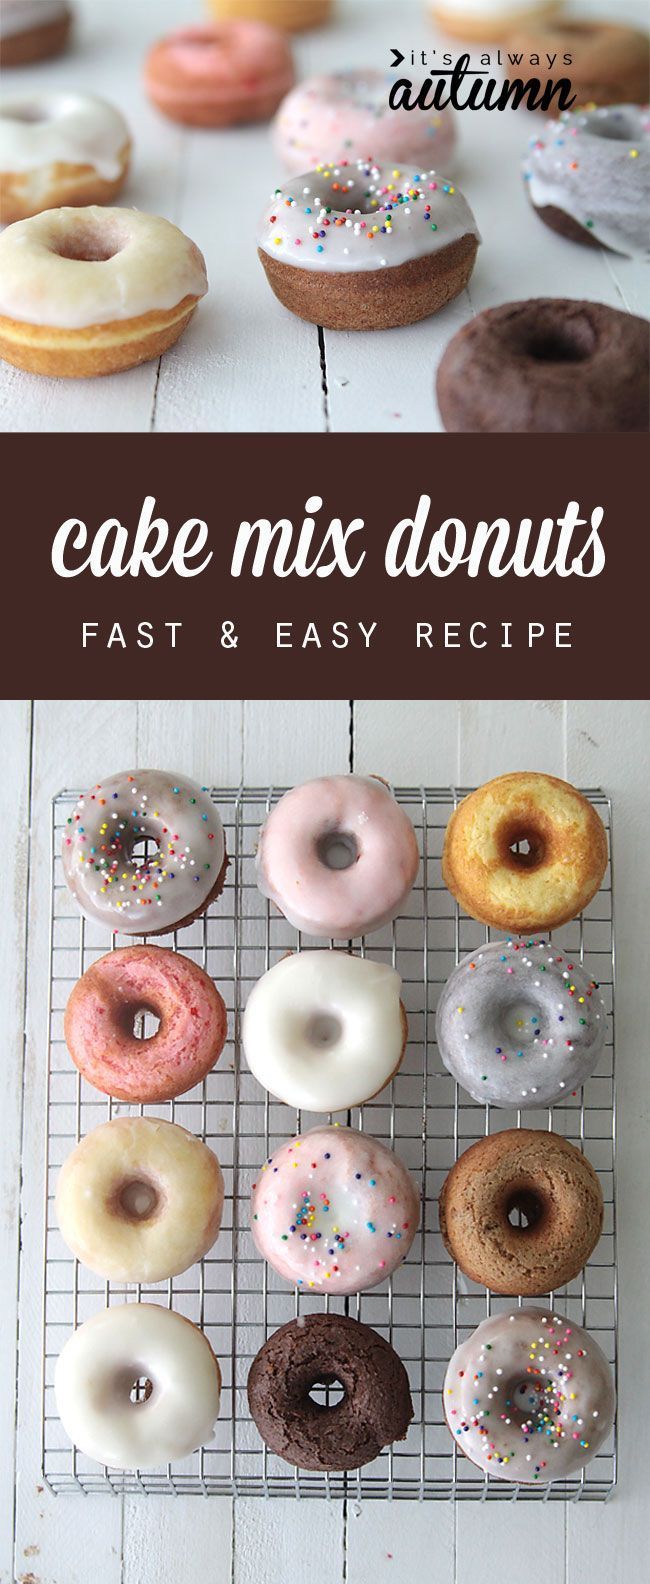 great idea! you can use a cake mix to make quick & easy donuts in any flavor with this simple recipe. baked not fried!